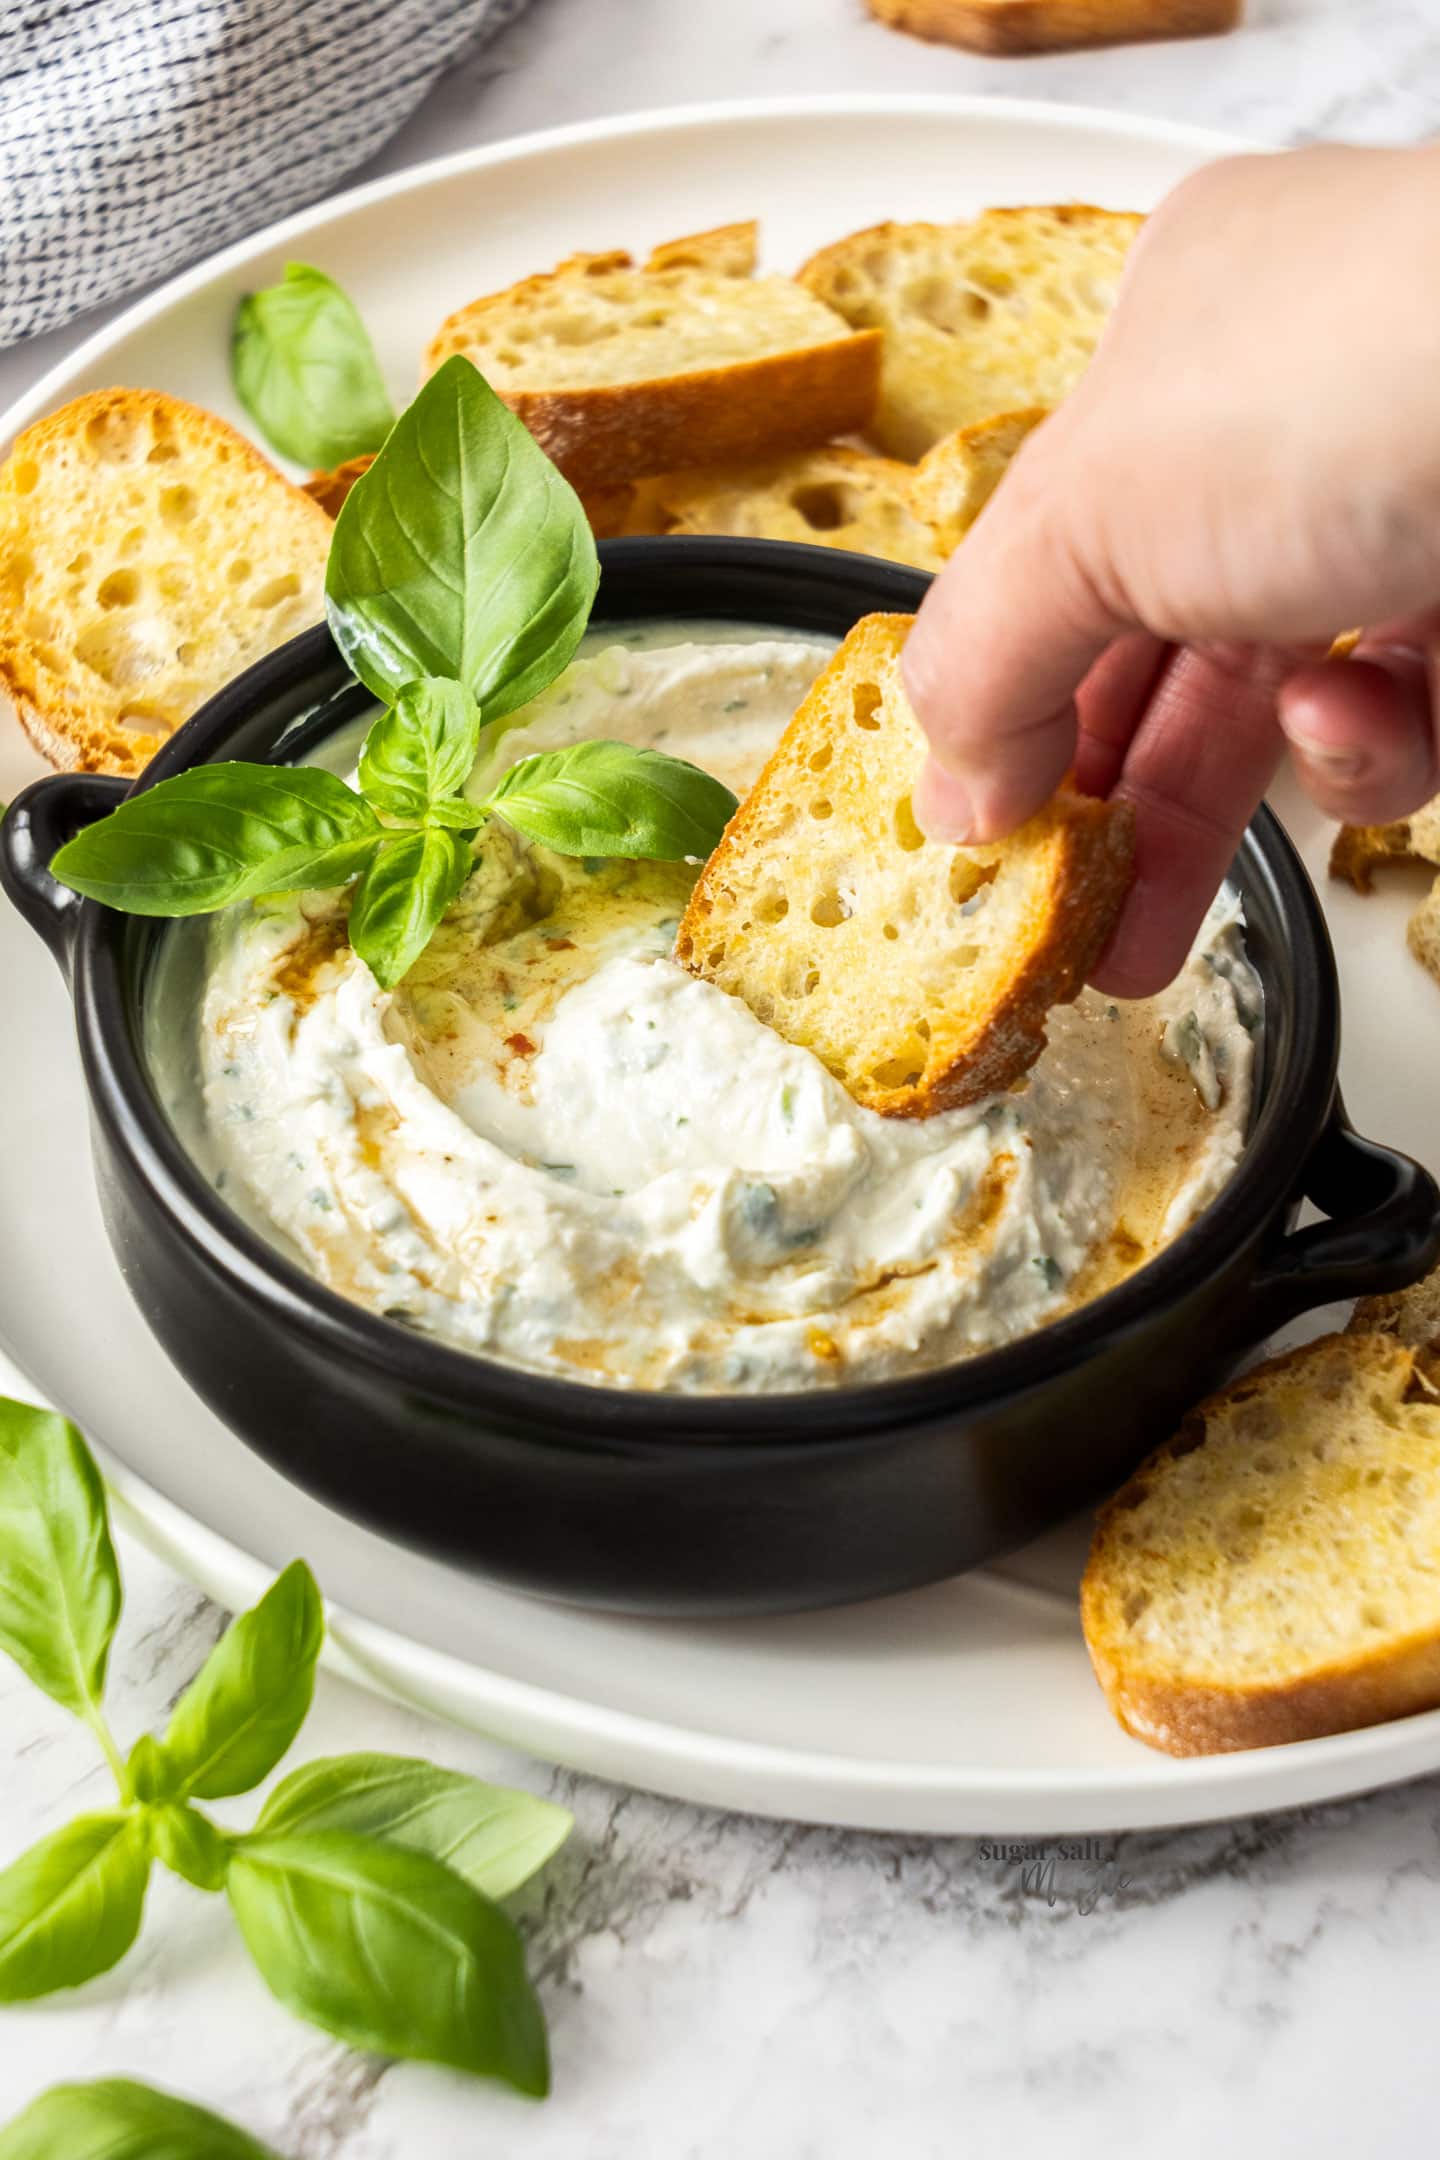 A piece of toasted bread being dipped into ricotta dip.